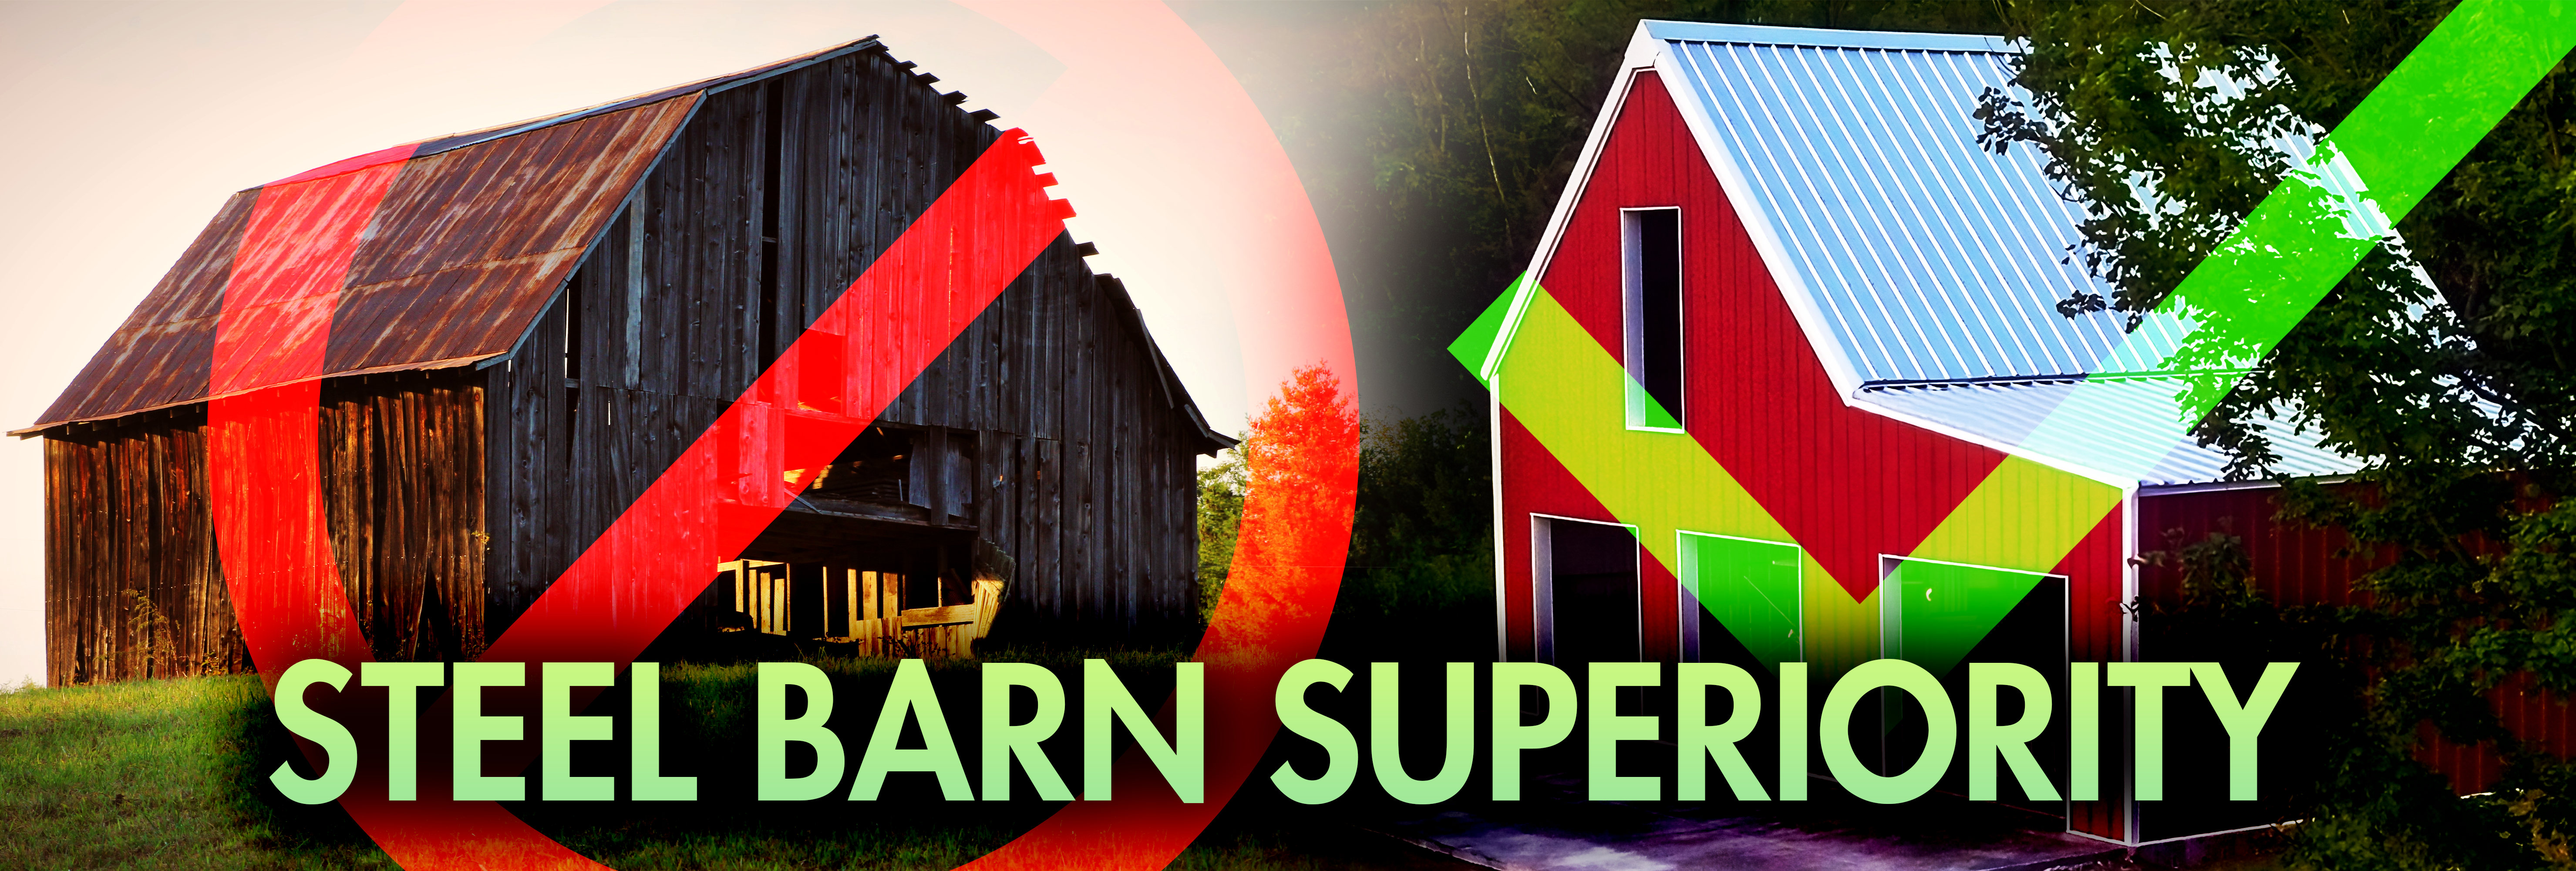 Why Settle for Wood When You Can Have a Steel Barn? Superiority of Steel Building Kits